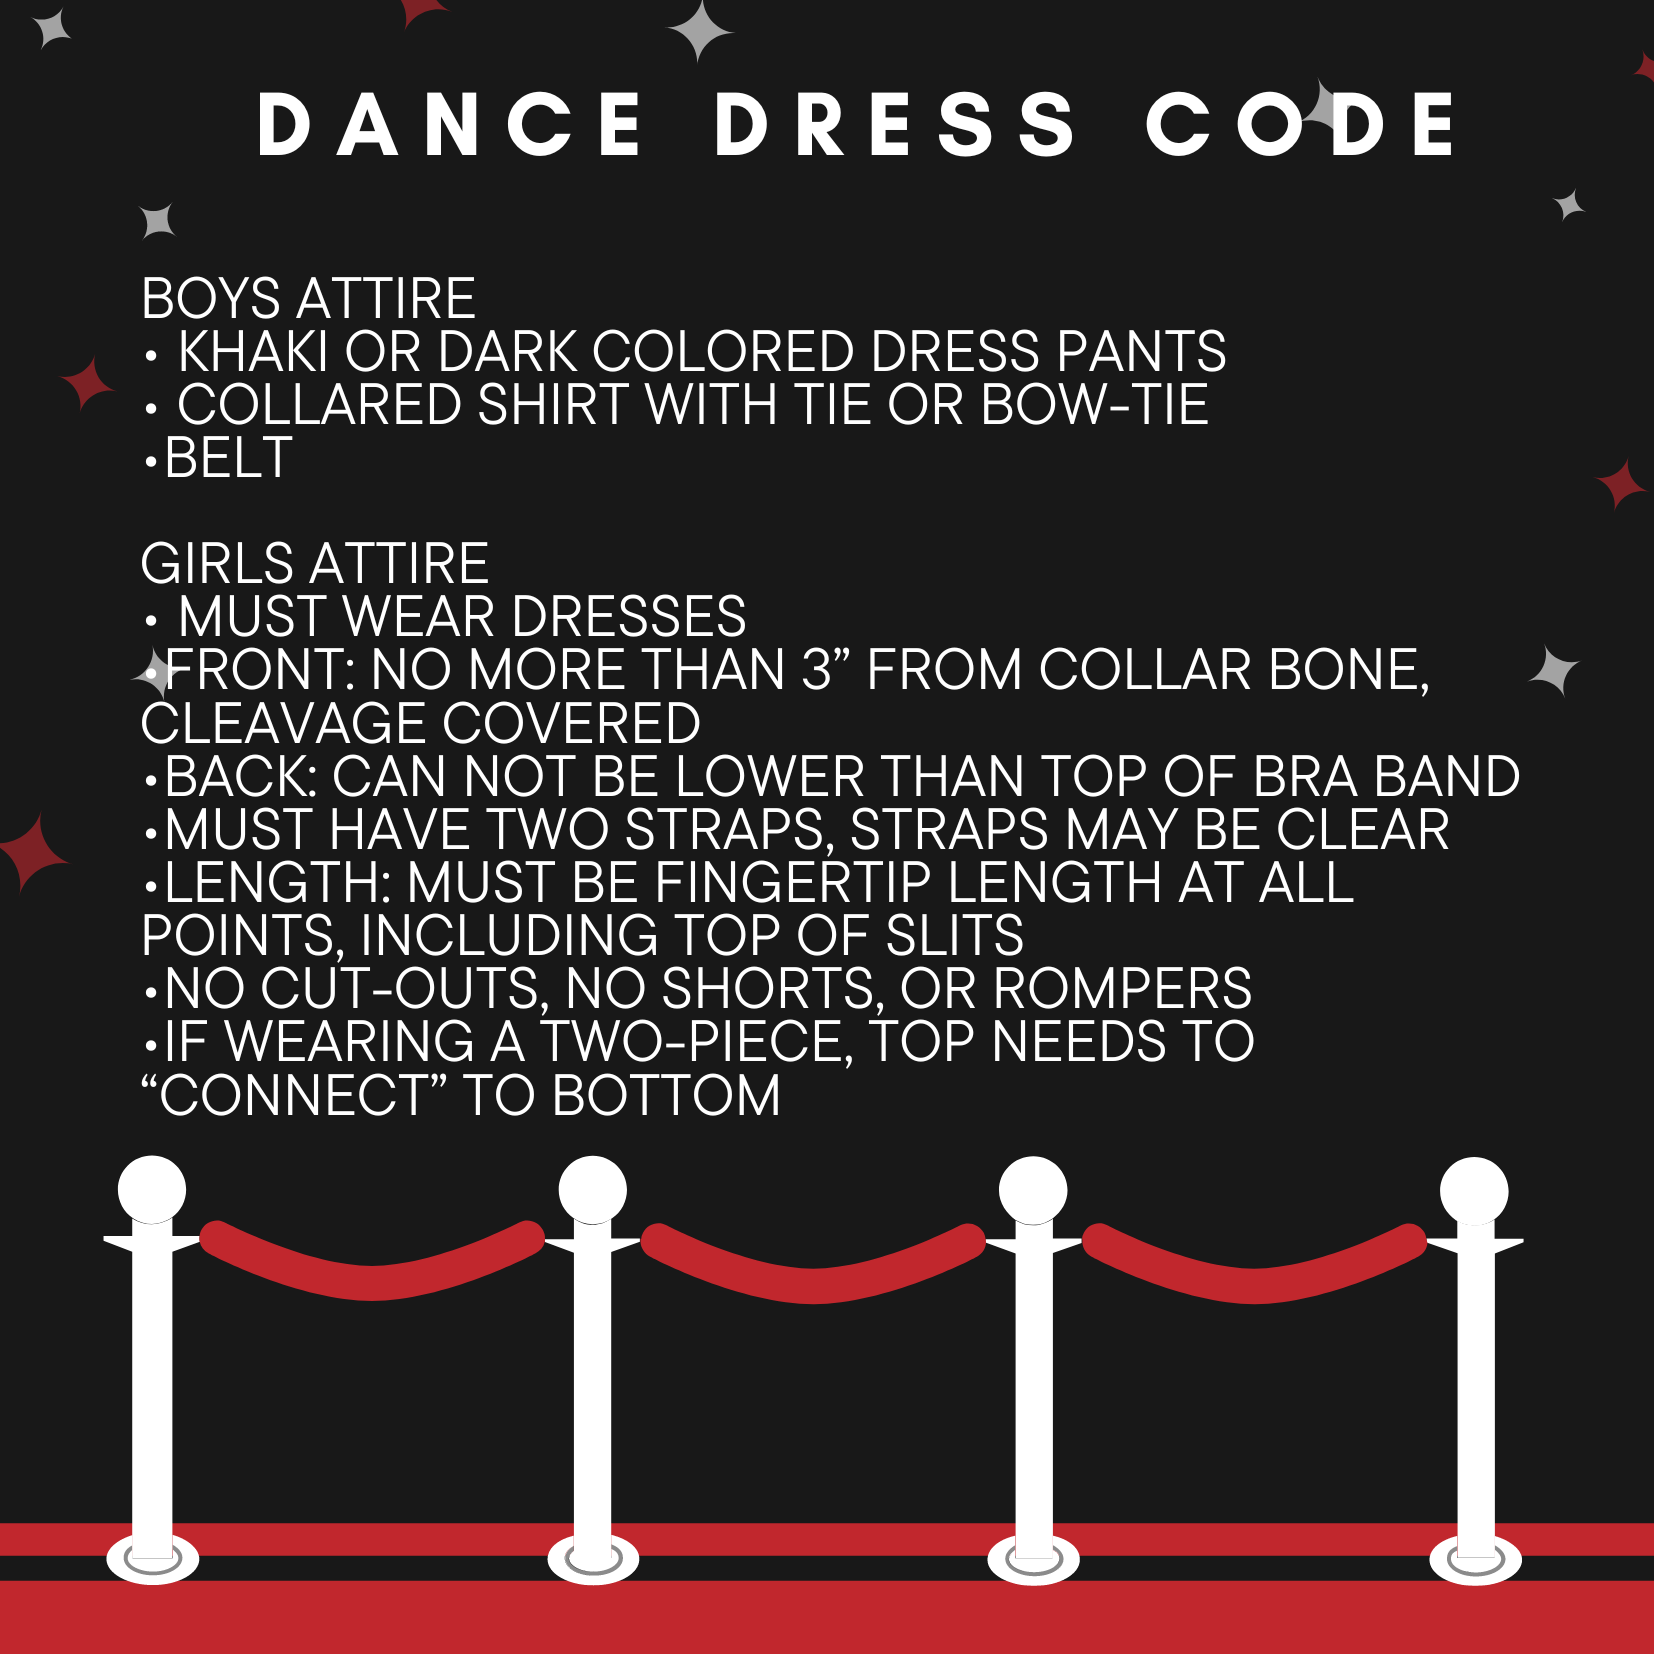 "Boys Dress Code for Dance: Khaki or dark colored dress pants, collared shirt with tie or bow tie, belt  Girls Dress code: must wear dresses, front no more than 3 inches from collar bone, cleavage covered,  back cannot be lower than top of bra band, must have two straps, straps may be clear, must be fingertip length at all points including the tops of slits,  no cut outs no shorts or rompers,  if wearing a two piece, tops must "connect" to bottom (Image of red rope)